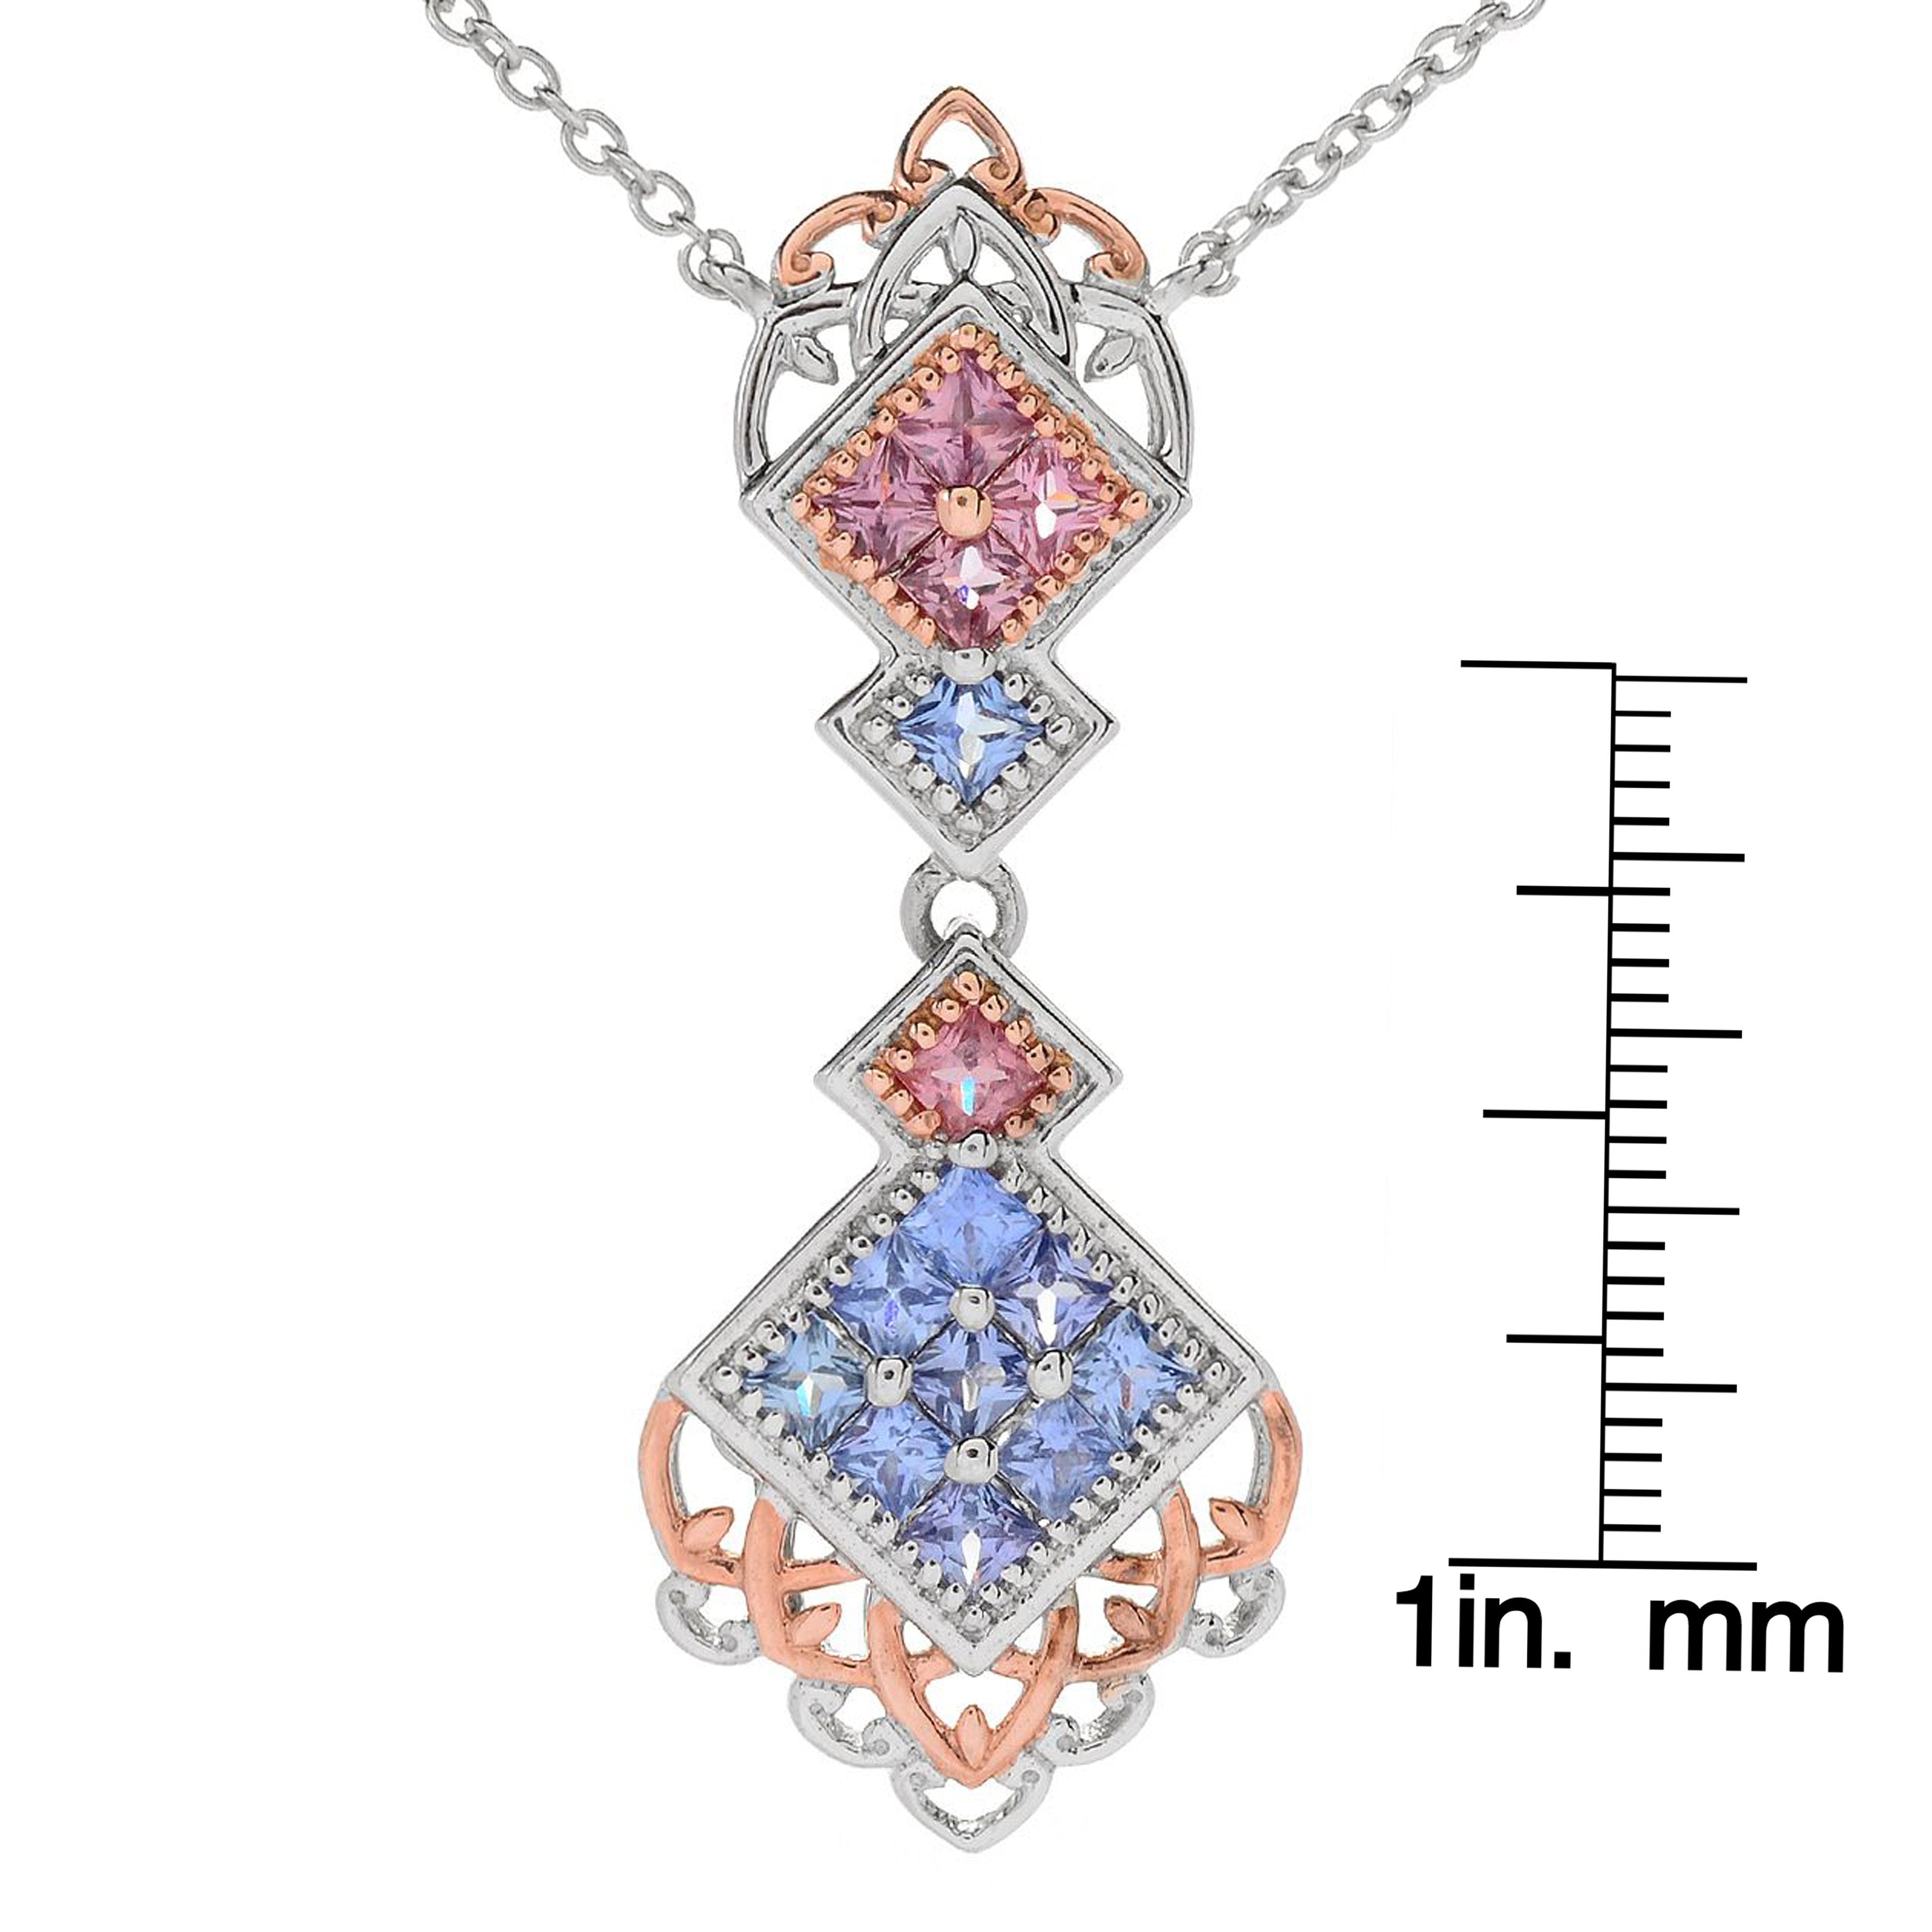 1.07 ctw Pink Sapphire and Diamond Pendant in 14k white gold (SSP